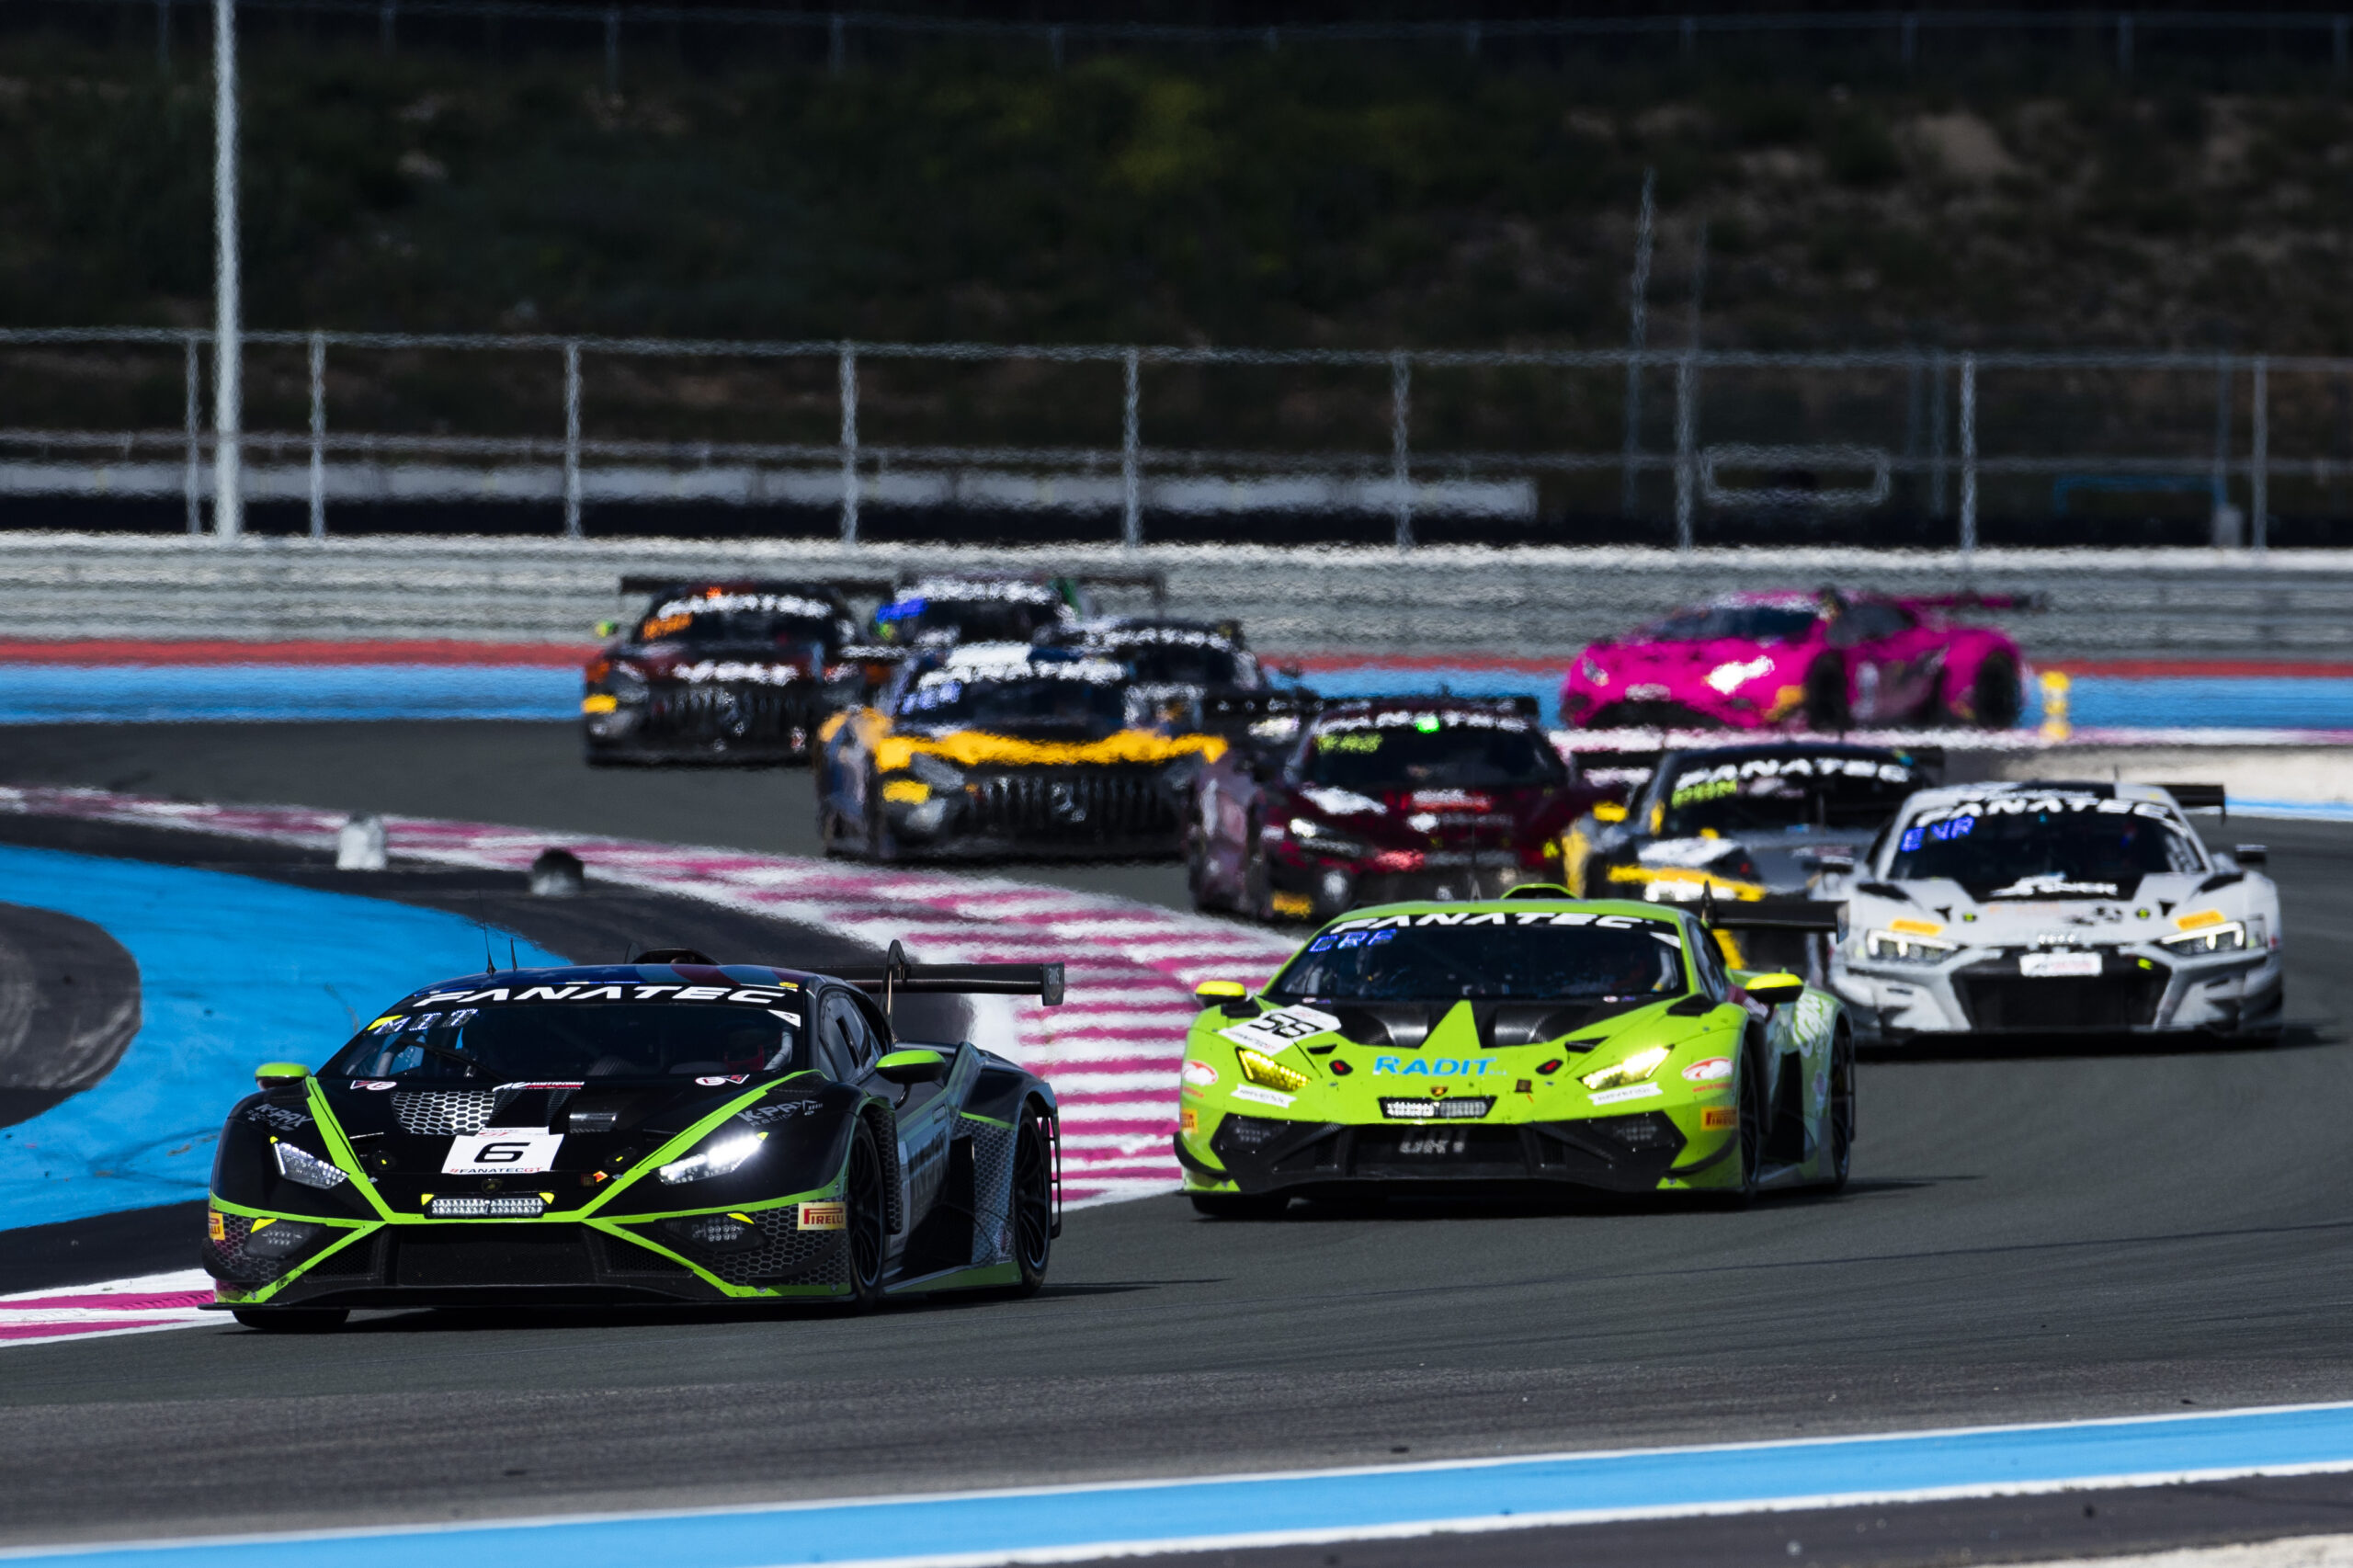 Last minute pit stop puts brakes on strong result for K-Pax Racing in 1000km enduro